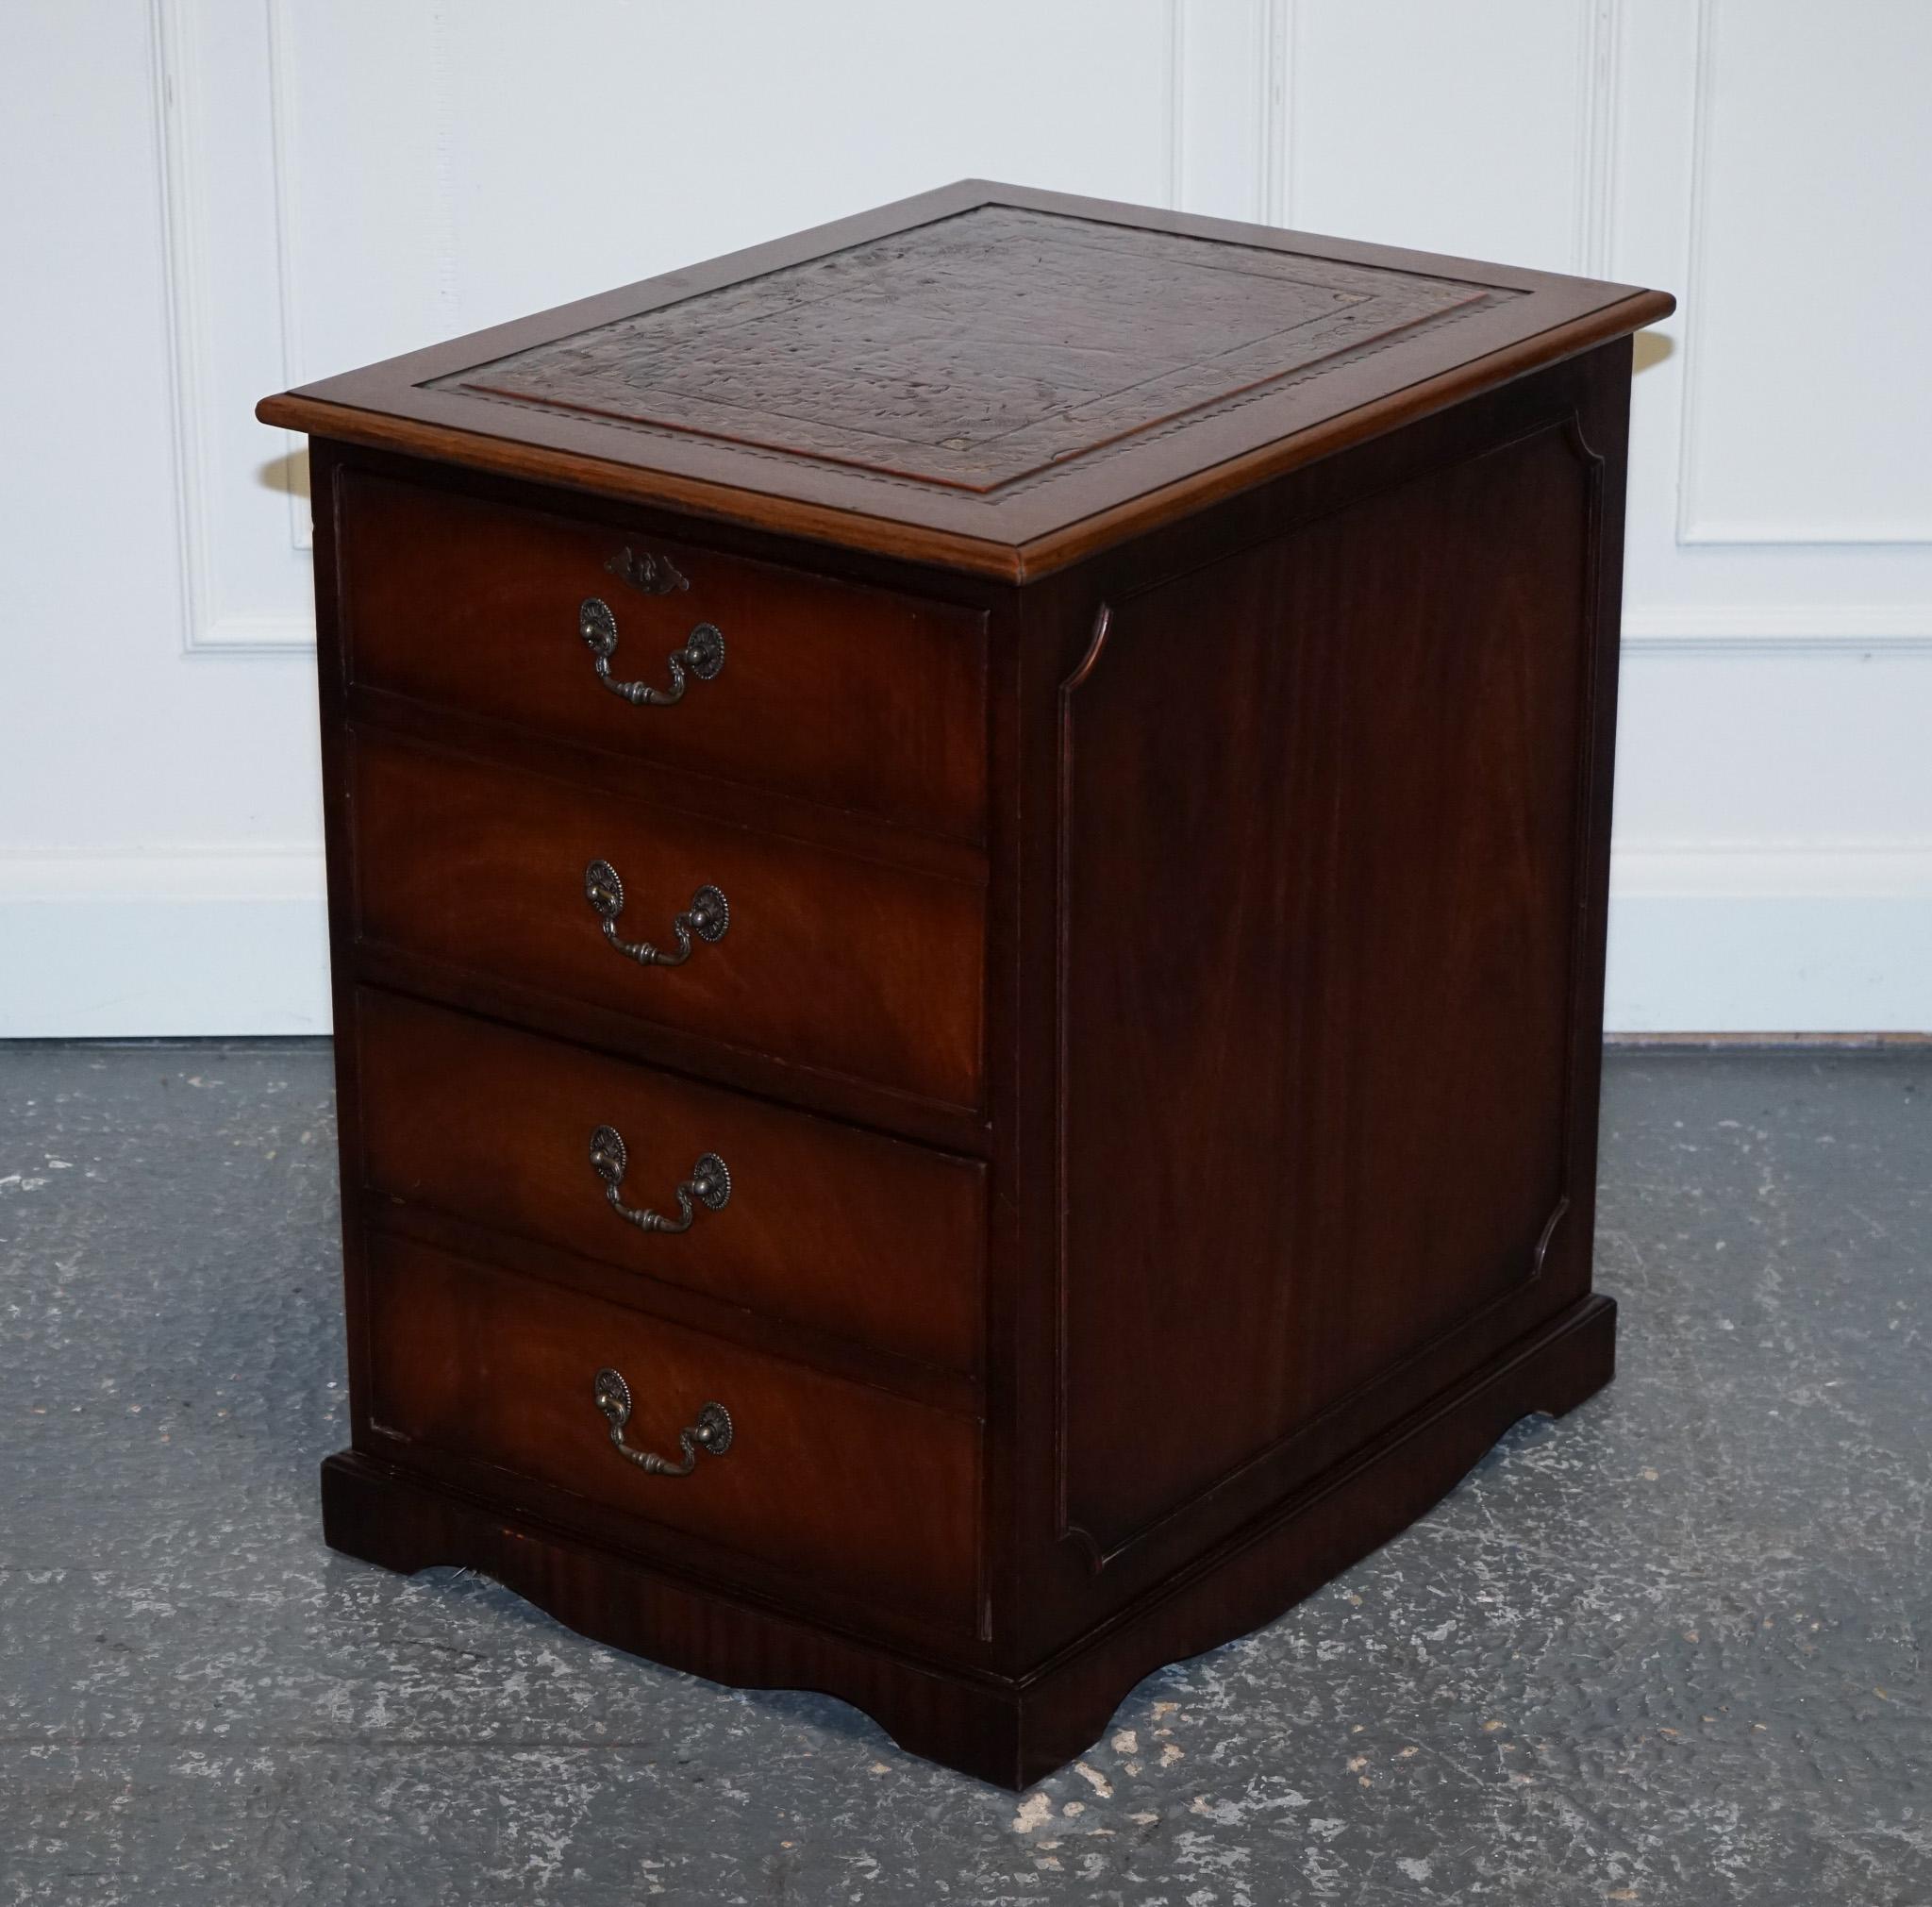 
We are delighted to offer for sale this Lovely Mahogany Brown Leather Filing Cabinet.
 
This stunning vintage filing cabinet is a true statement piece, featuring a beautiful combination of gold and brown. The cabinet boasts two spacious drawers,